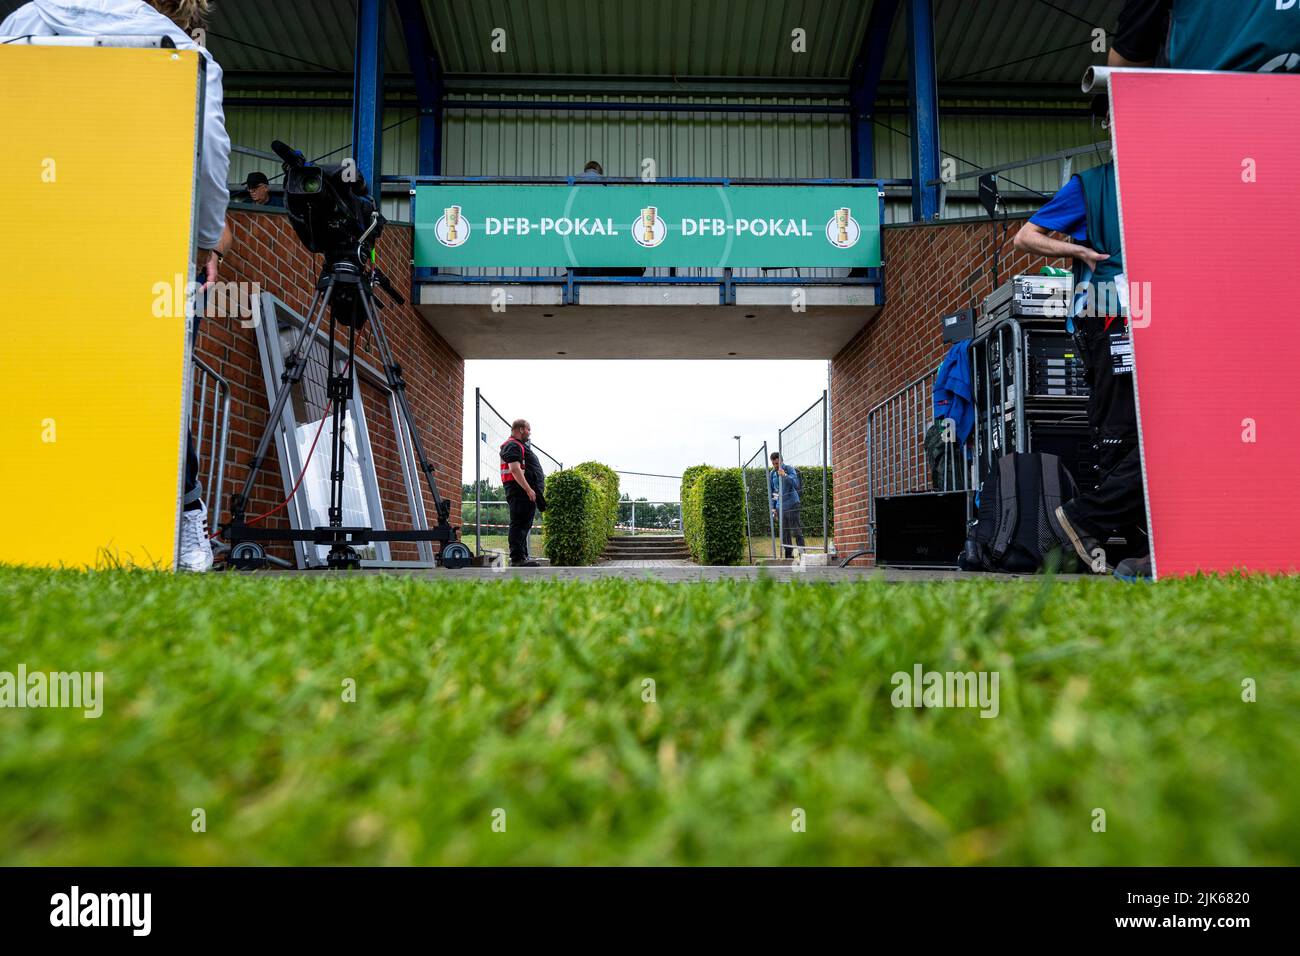 Rehden, Germany. 31st July, 2022. Soccer: DFB Cup, BSV Rehden - SV Sandhausen, 1st round, Waldsportstätten sports field: View of the players' entrance with the DFB Cup logo. Credit: David Inderlied/dpa - IMPORTANT NOTE: In accordance with the requirements of the DFL Deutsche Fußball Liga and the DFB Deutscher Fußball-Bund, it is prohibited to use or have used photographs taken in the stadium and/or of the match in the form of sequence pictures and/or video-like photo series./dpa/Alamy Live News Stock Photo